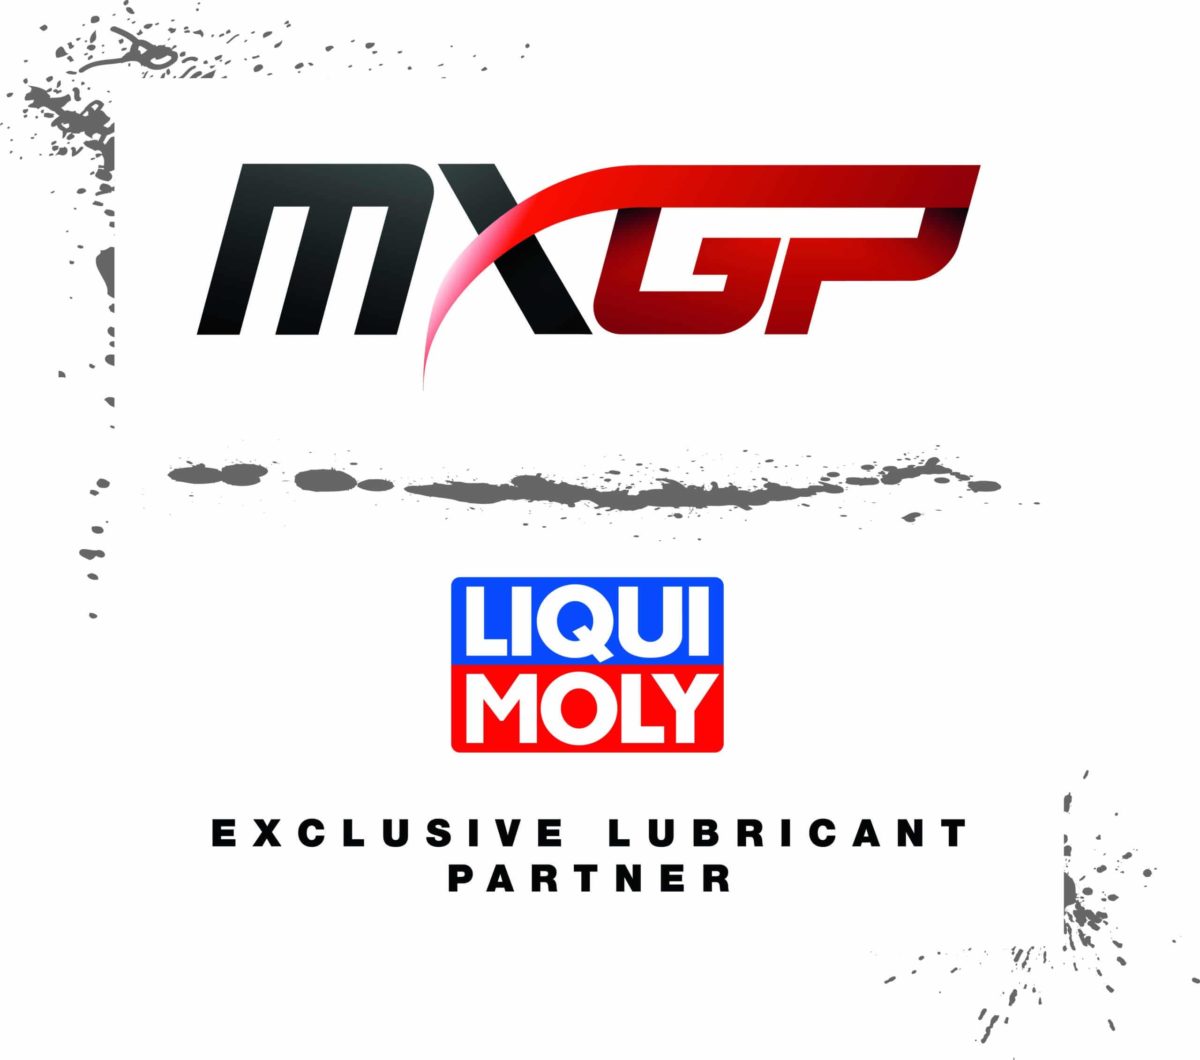 LIQUI MOLY is the exclusive lubricant partner of MXGP